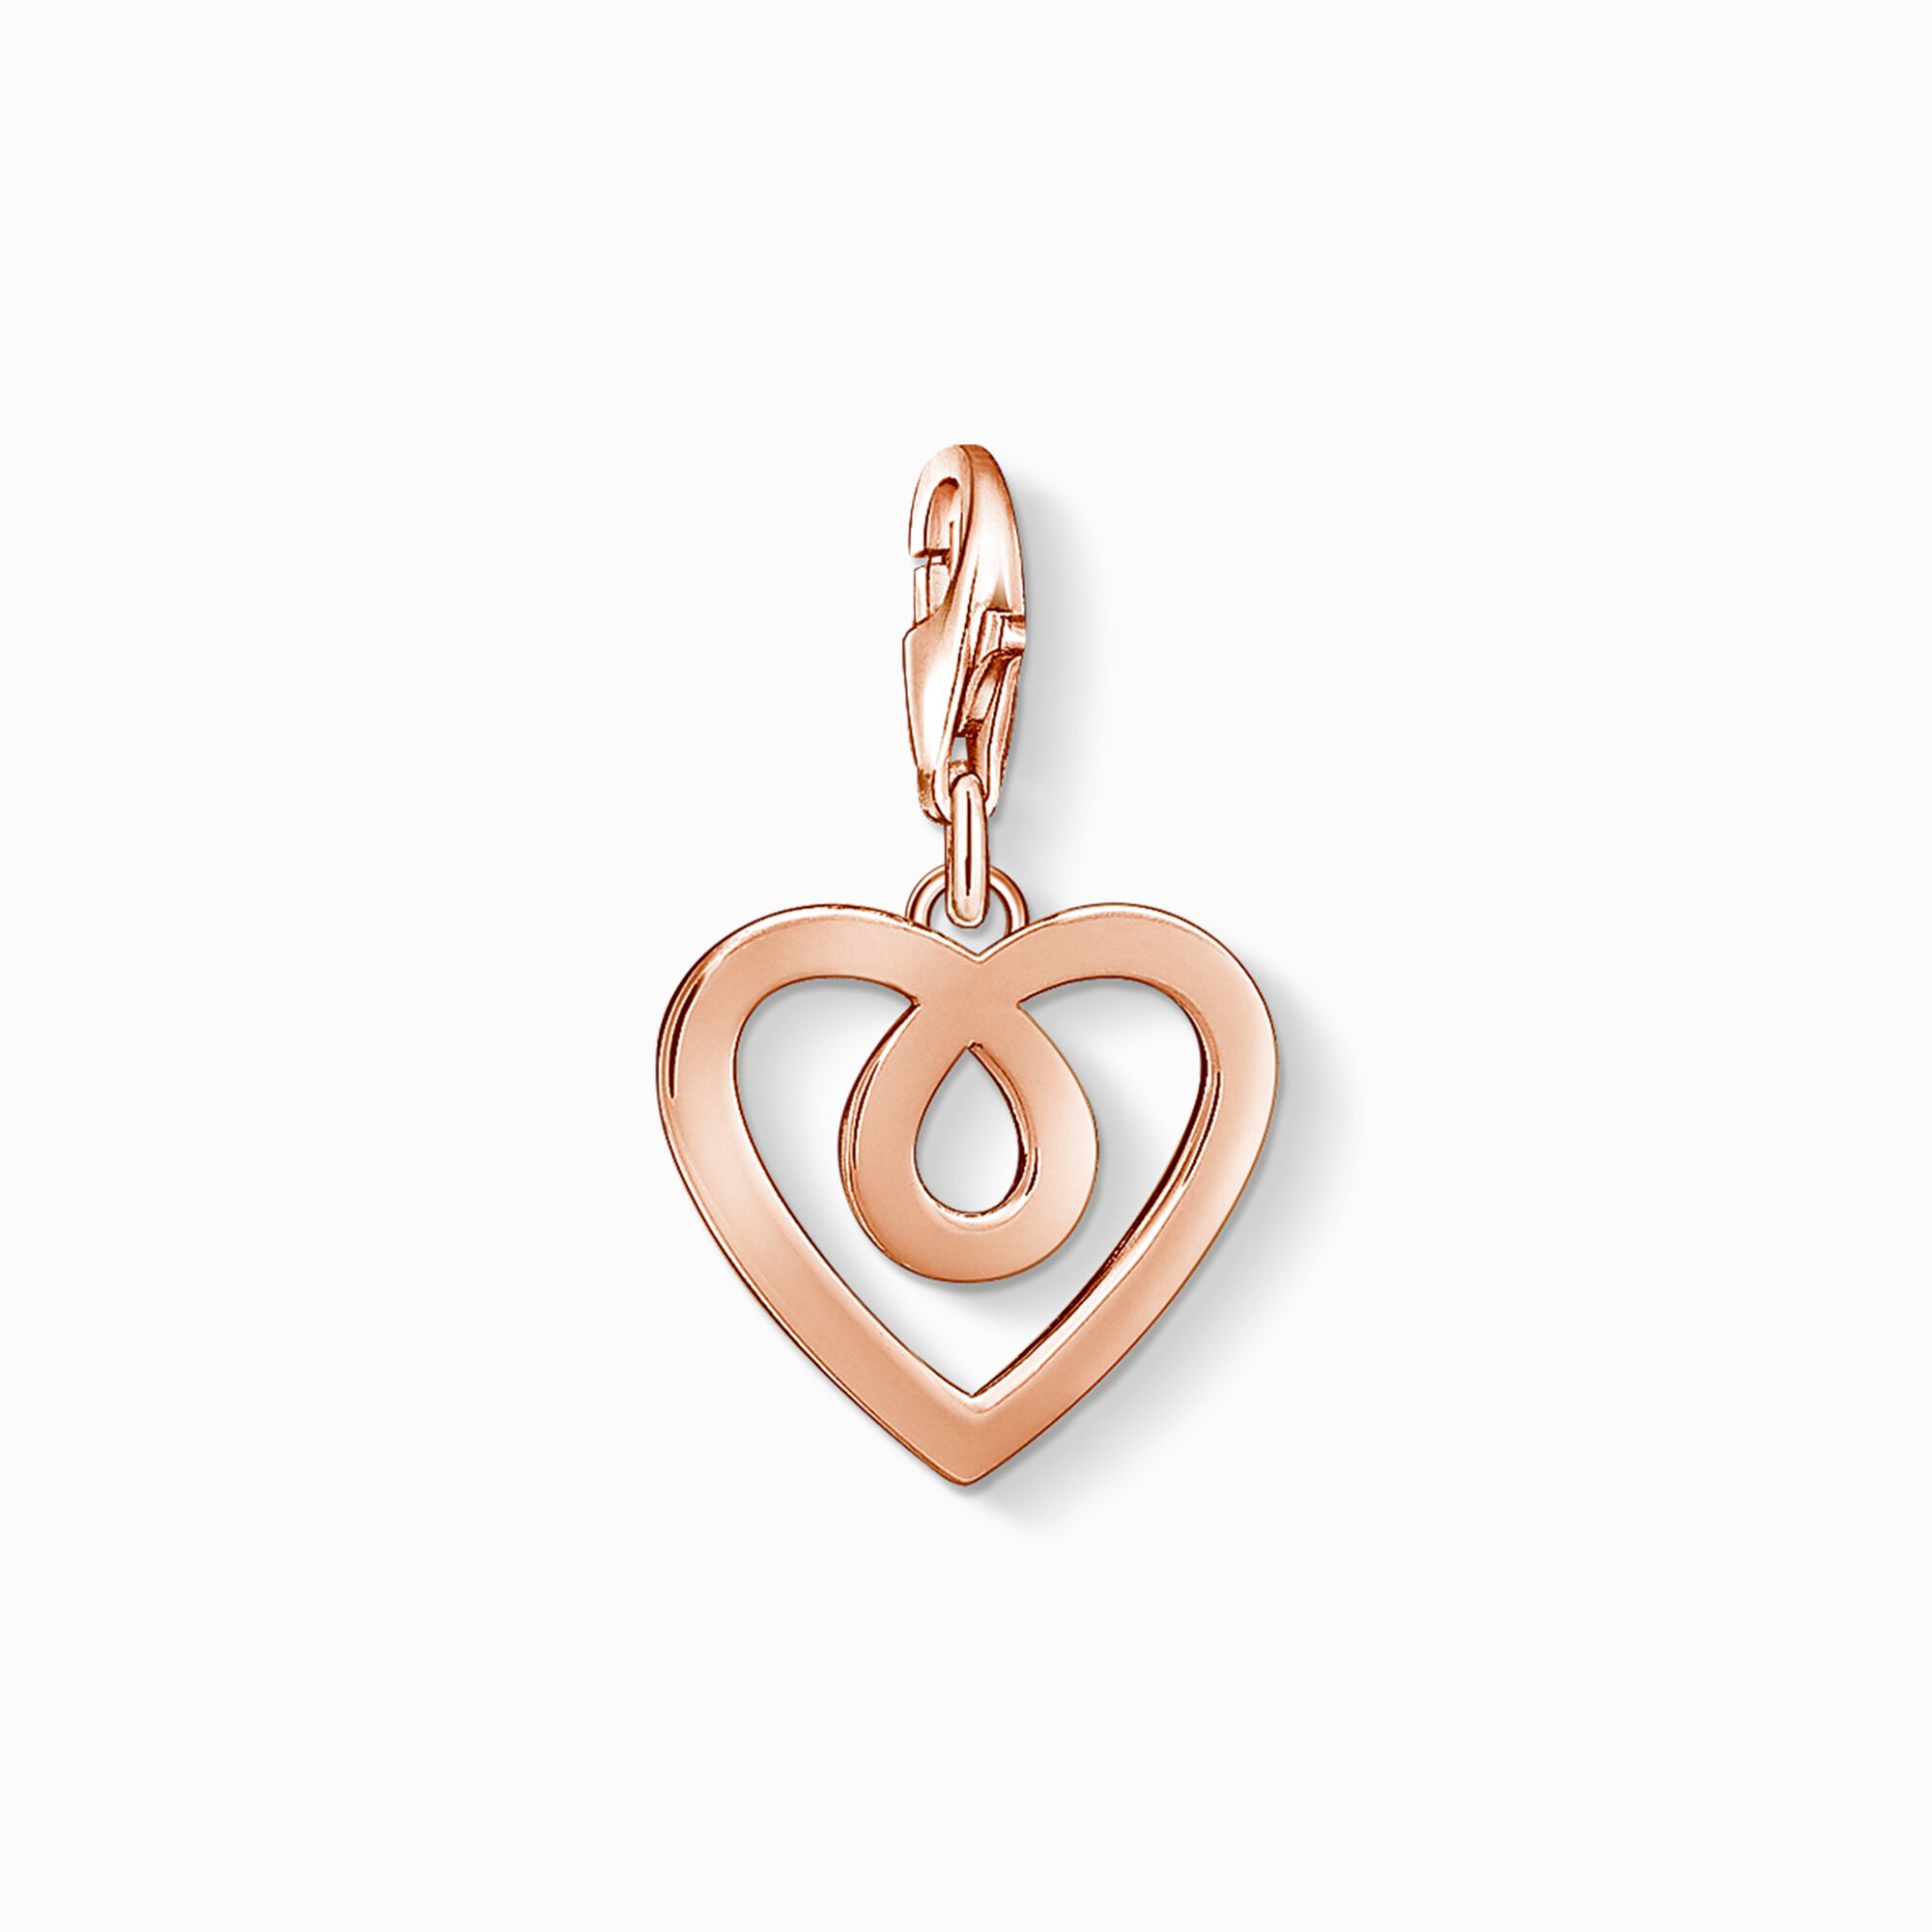 Charm pendant heart rose-gold from the Charm Club collection in the THOMAS SABO online store